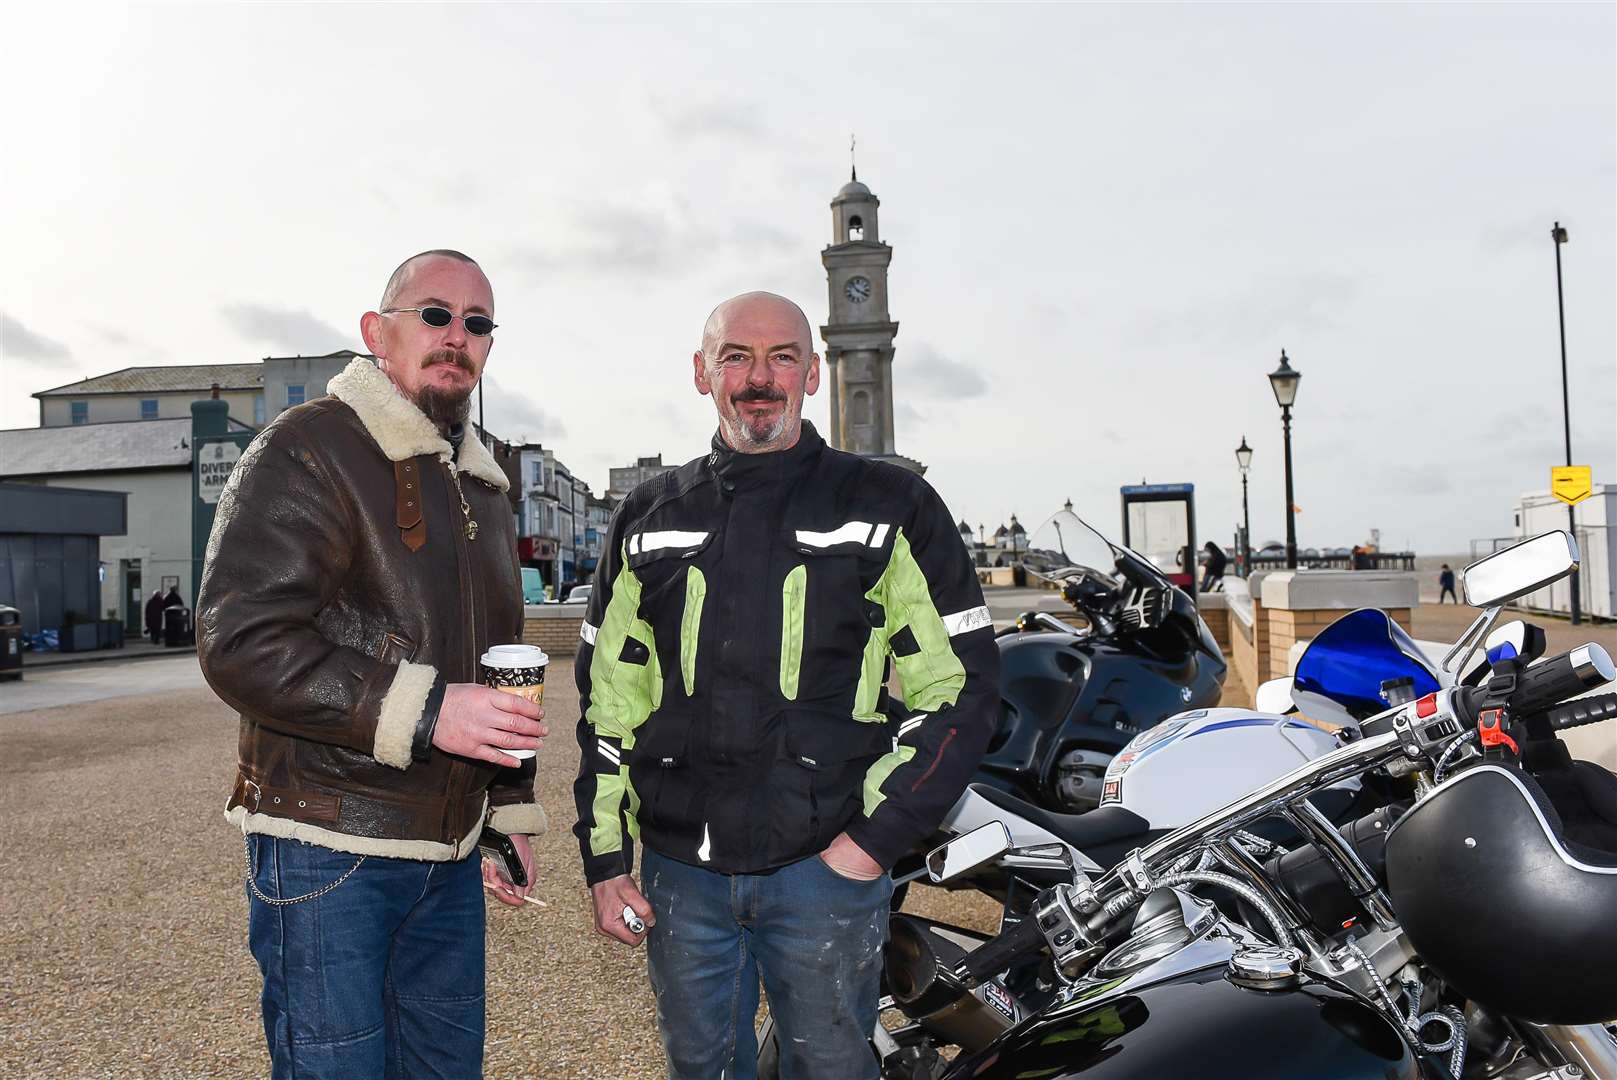 Bikers Lee Gibson and Dave Adams fear a pavement parking ban could mean bikers won't be able to park outside Neptune's car park in Central Parade, Herne Bay